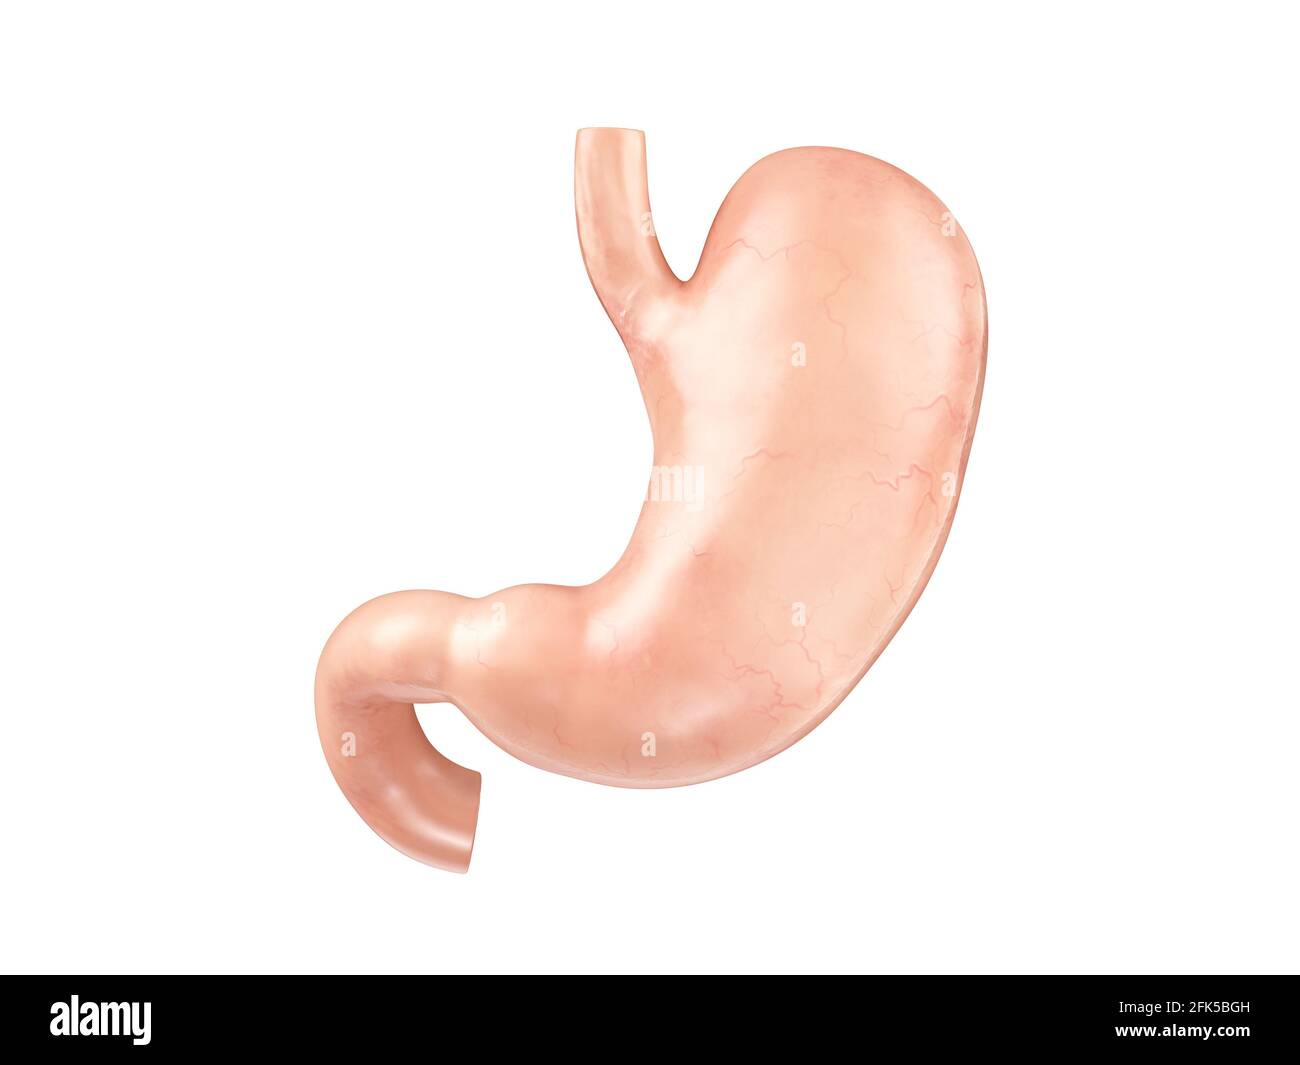 Anatomically accurate realistic 3d illustration of human internal organ - stomach with duodenum isolated on white background Stock Photo